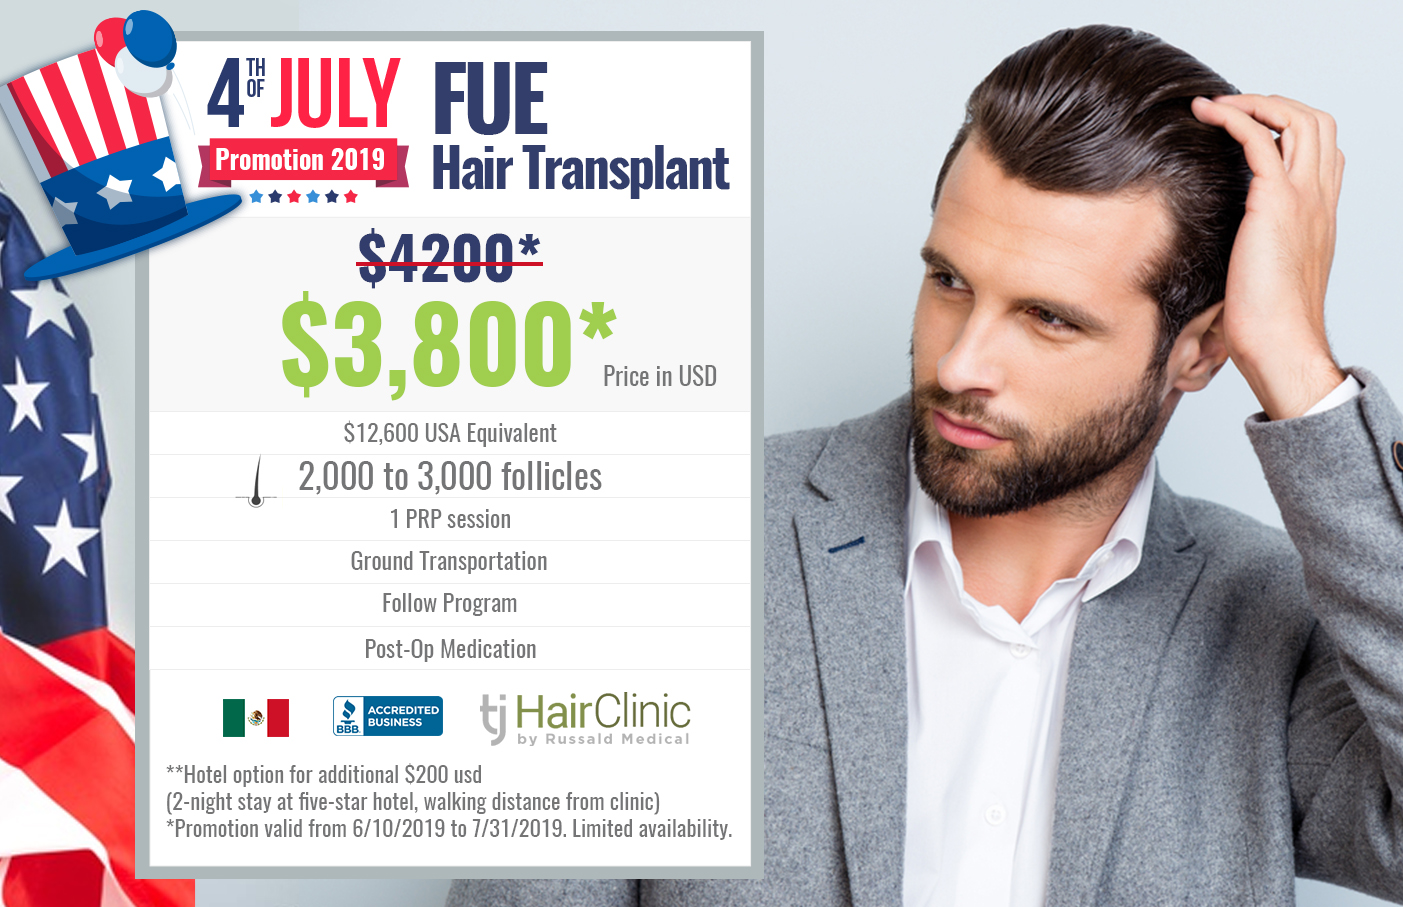 Fue Hair Transplant july 4th 2019 discount price